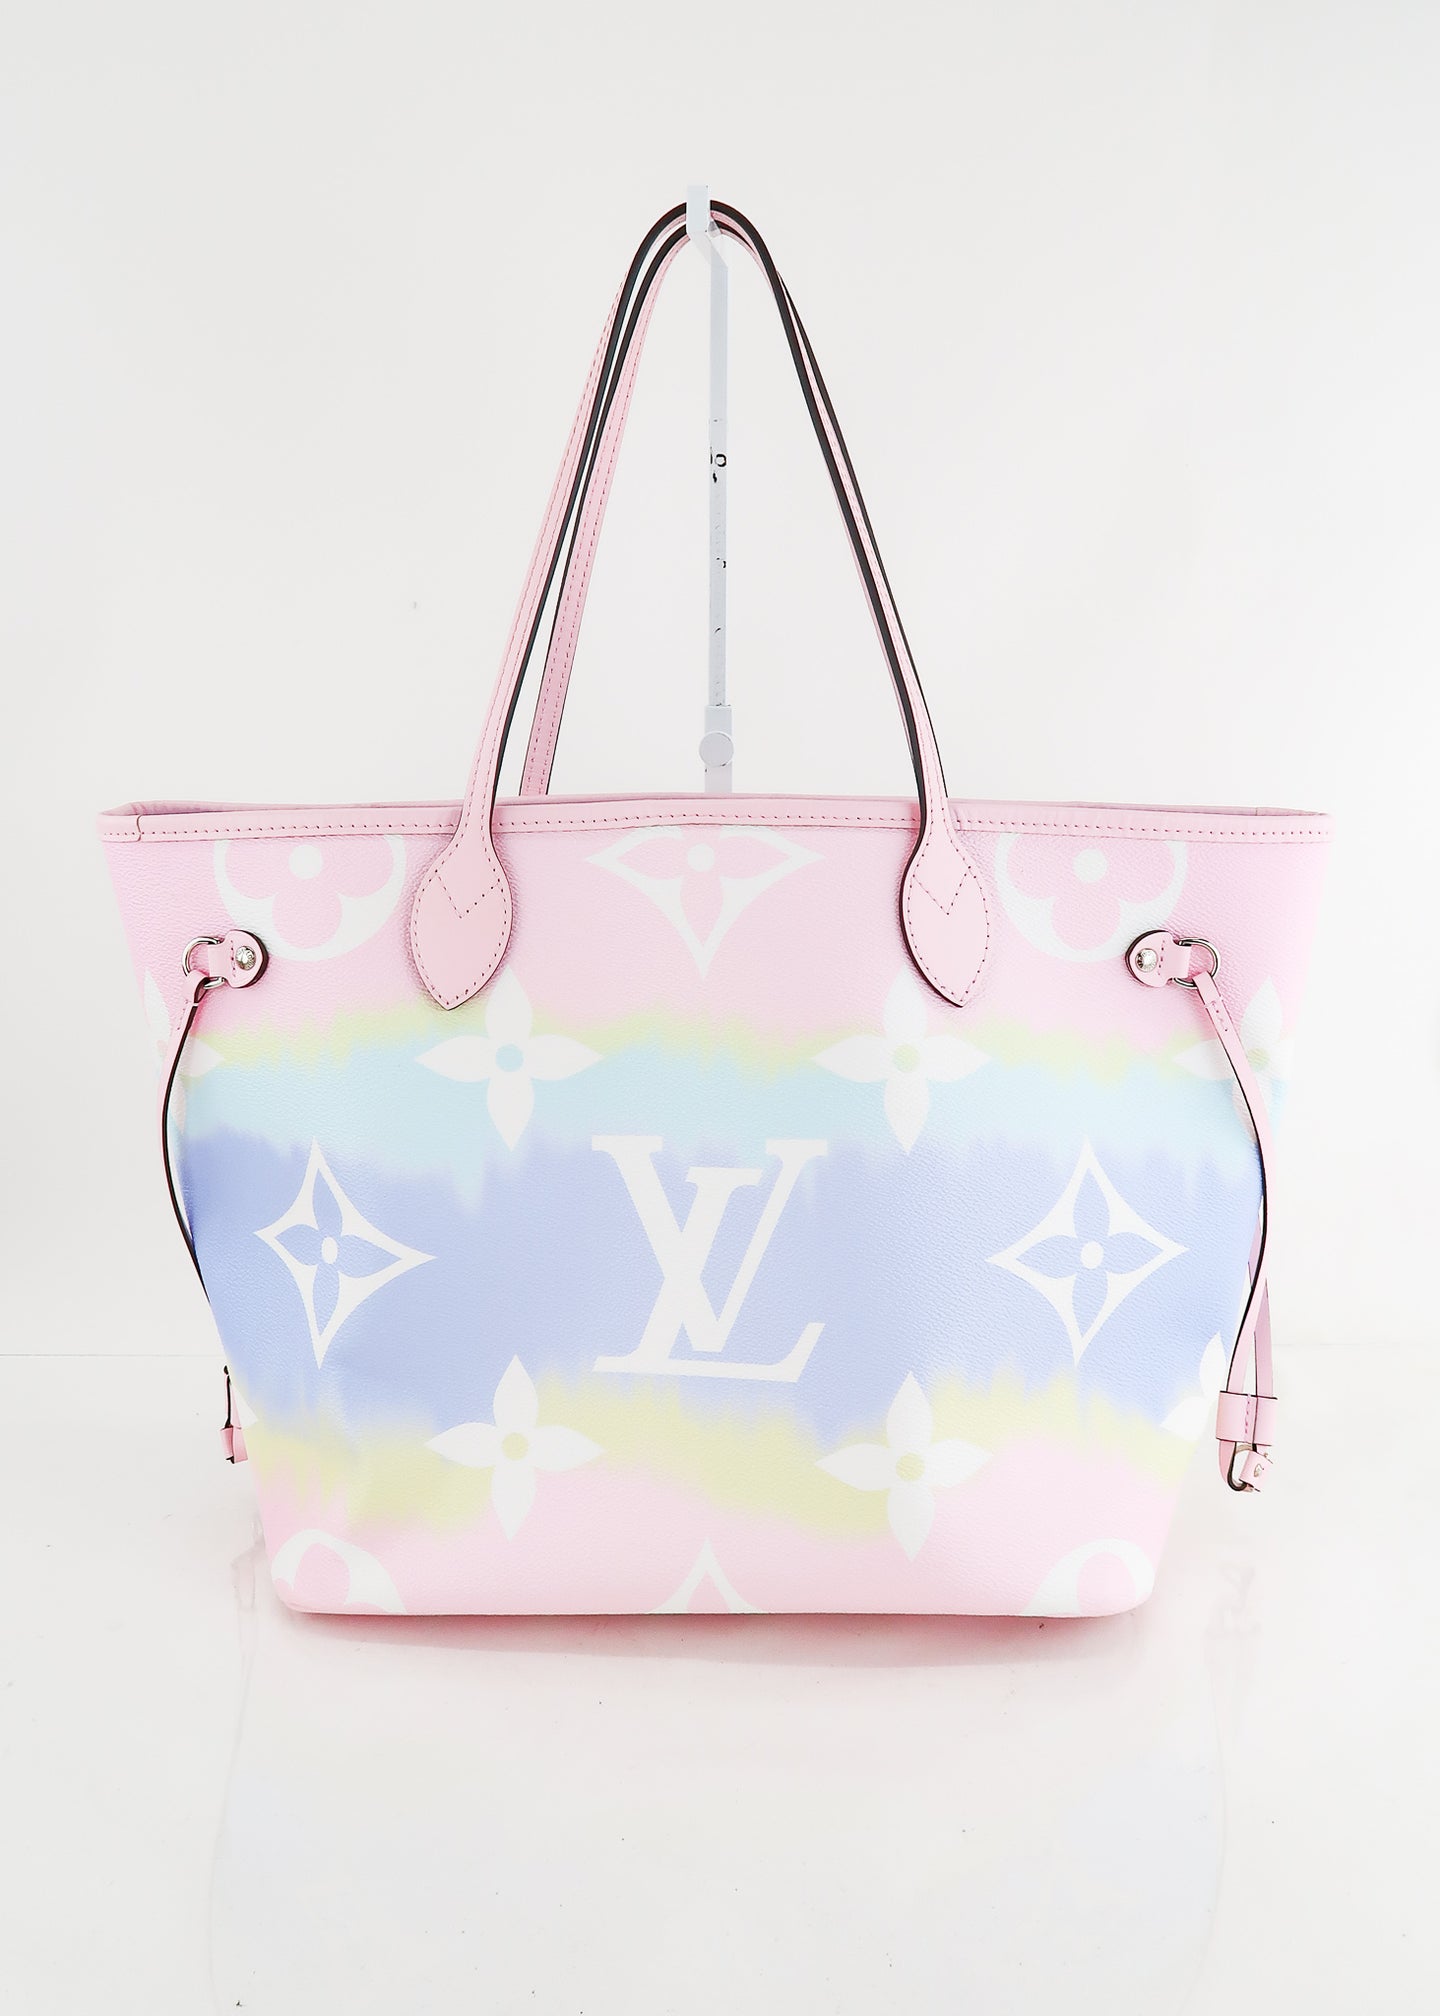 LOUIS VUITTON MONOGRAM NEVERFULL LIMITED EDITION ESCALE TOTE BAG